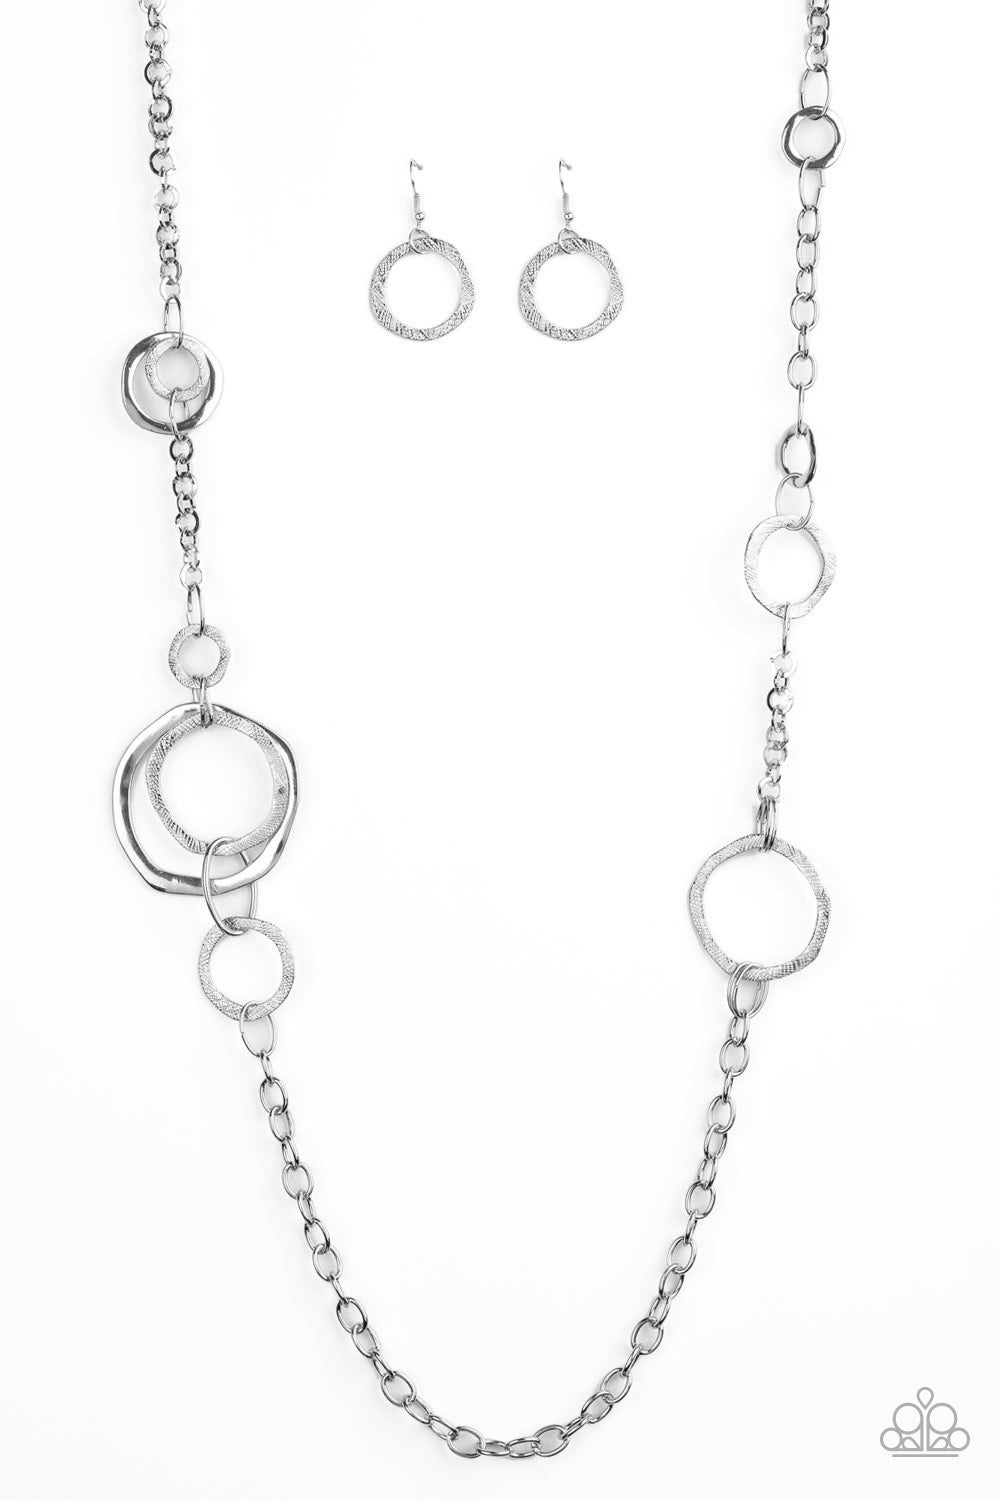 Paparazzi Accessories - Amped Up Metallics - Silver Necklace - Alies Bling Bar